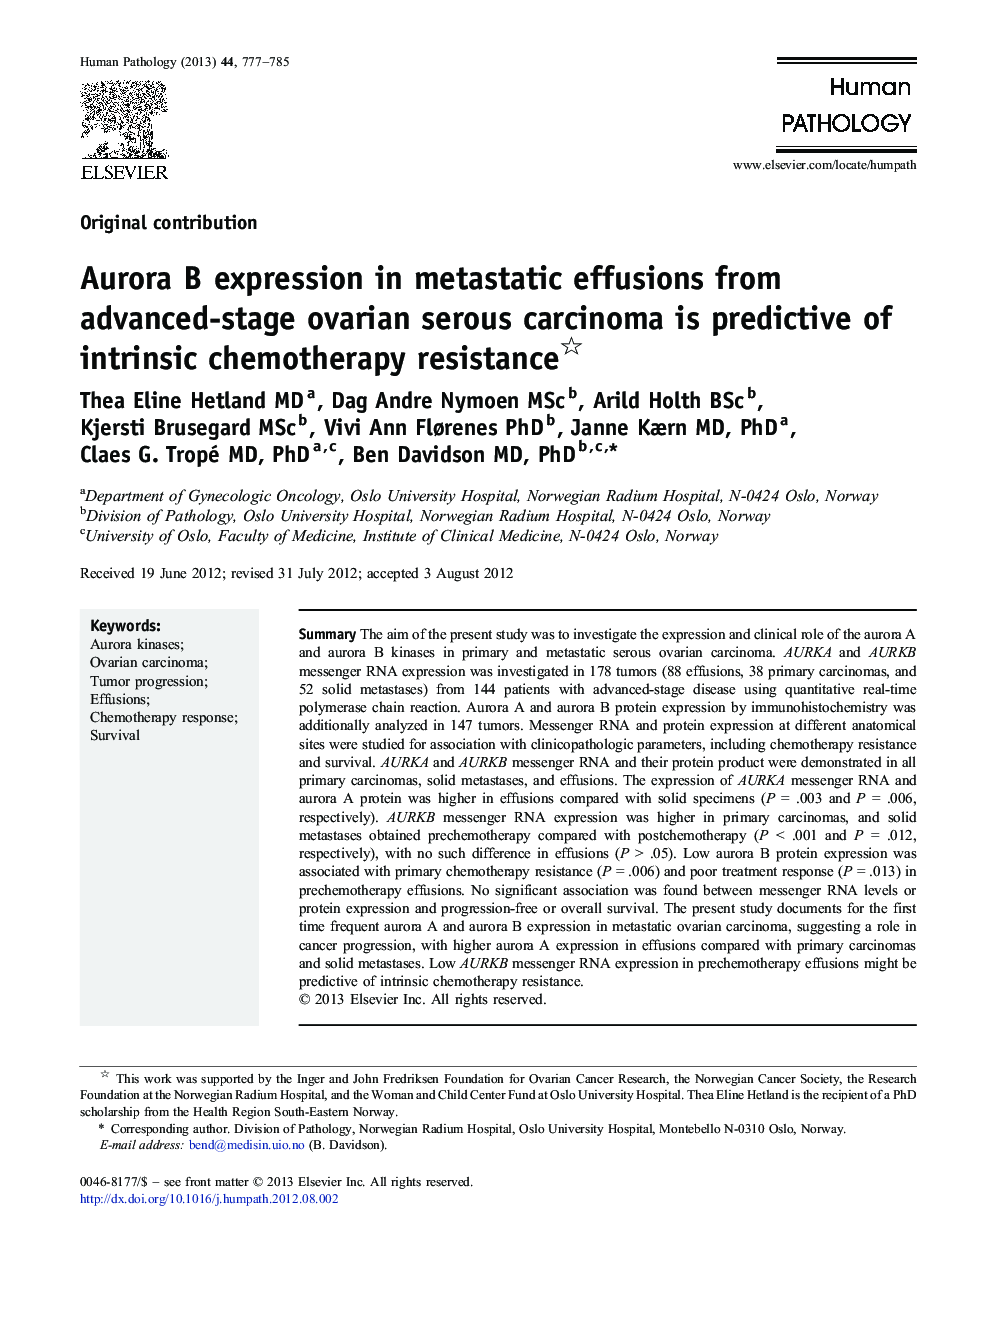 Aurora B expression in metastatic effusions from advanced-stage ovarian serous carcinoma is predictive of intrinsic chemotherapy resistance